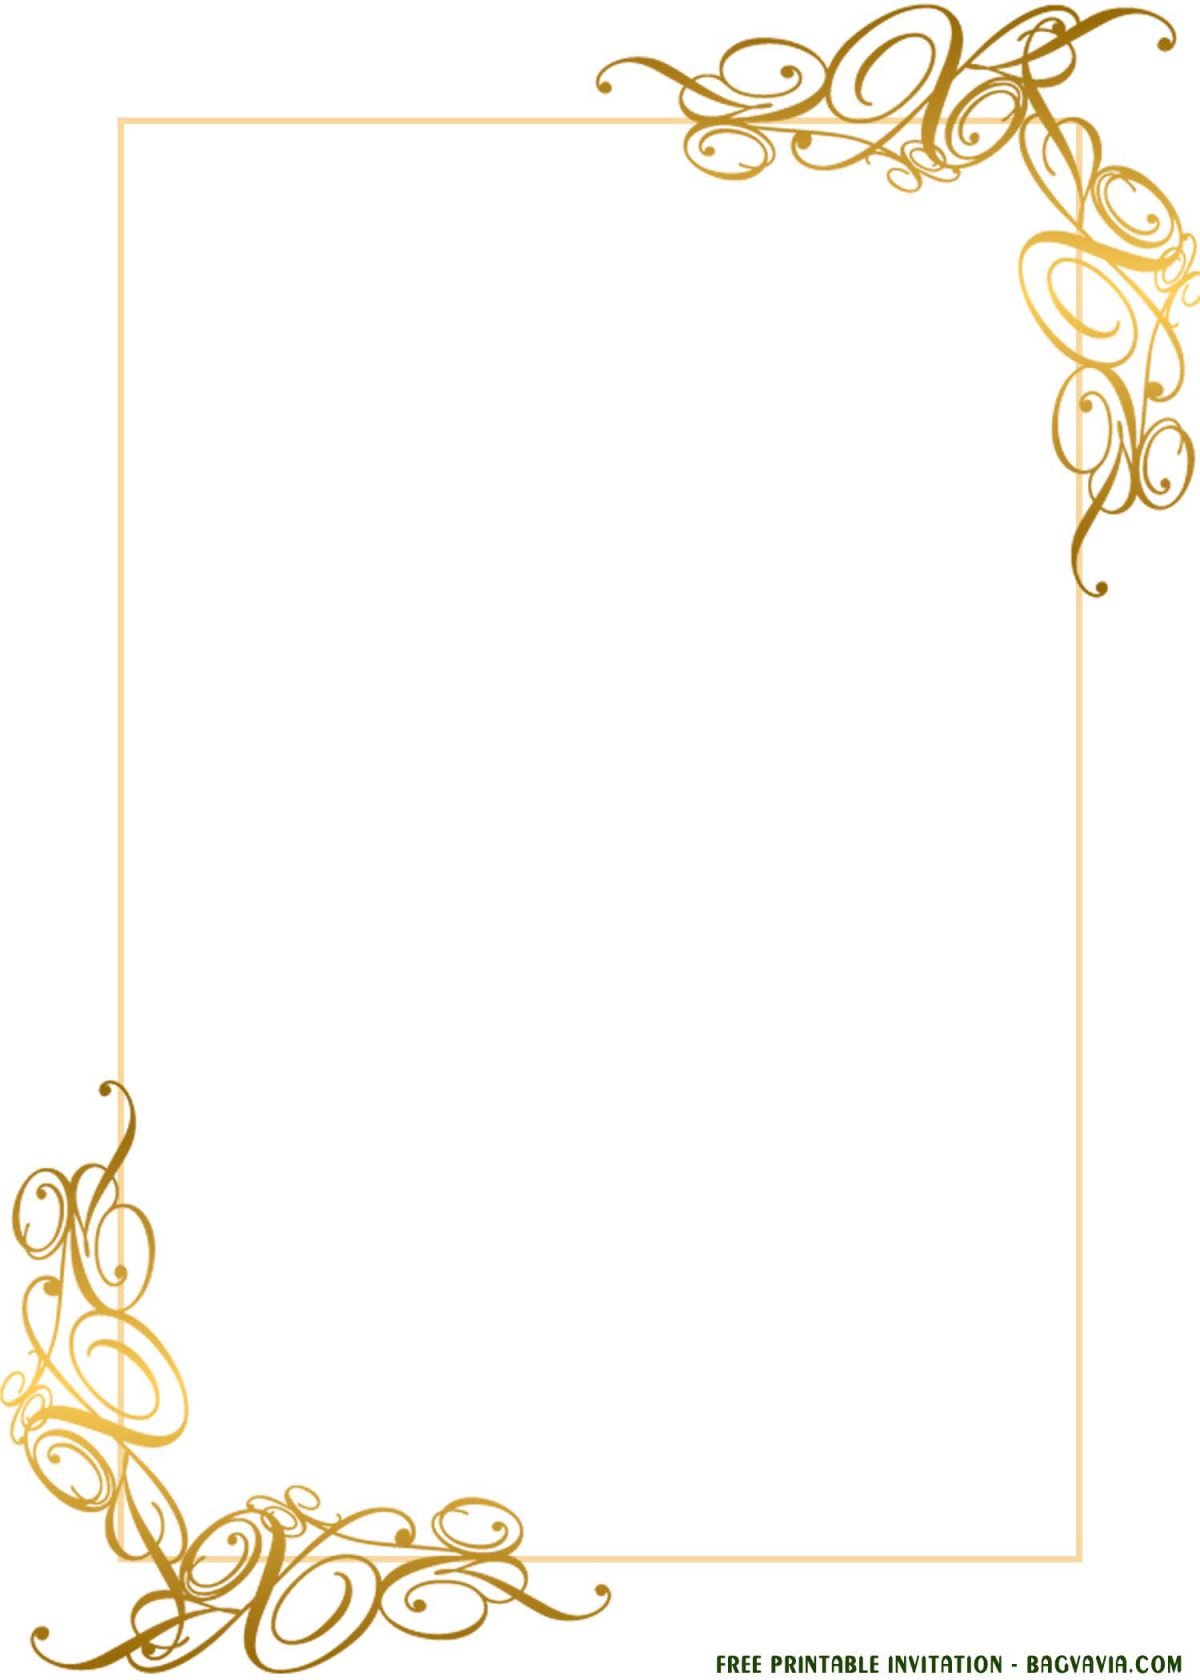 Free Printable Gold Lace Invitation Templates For Any Occasions With White Background